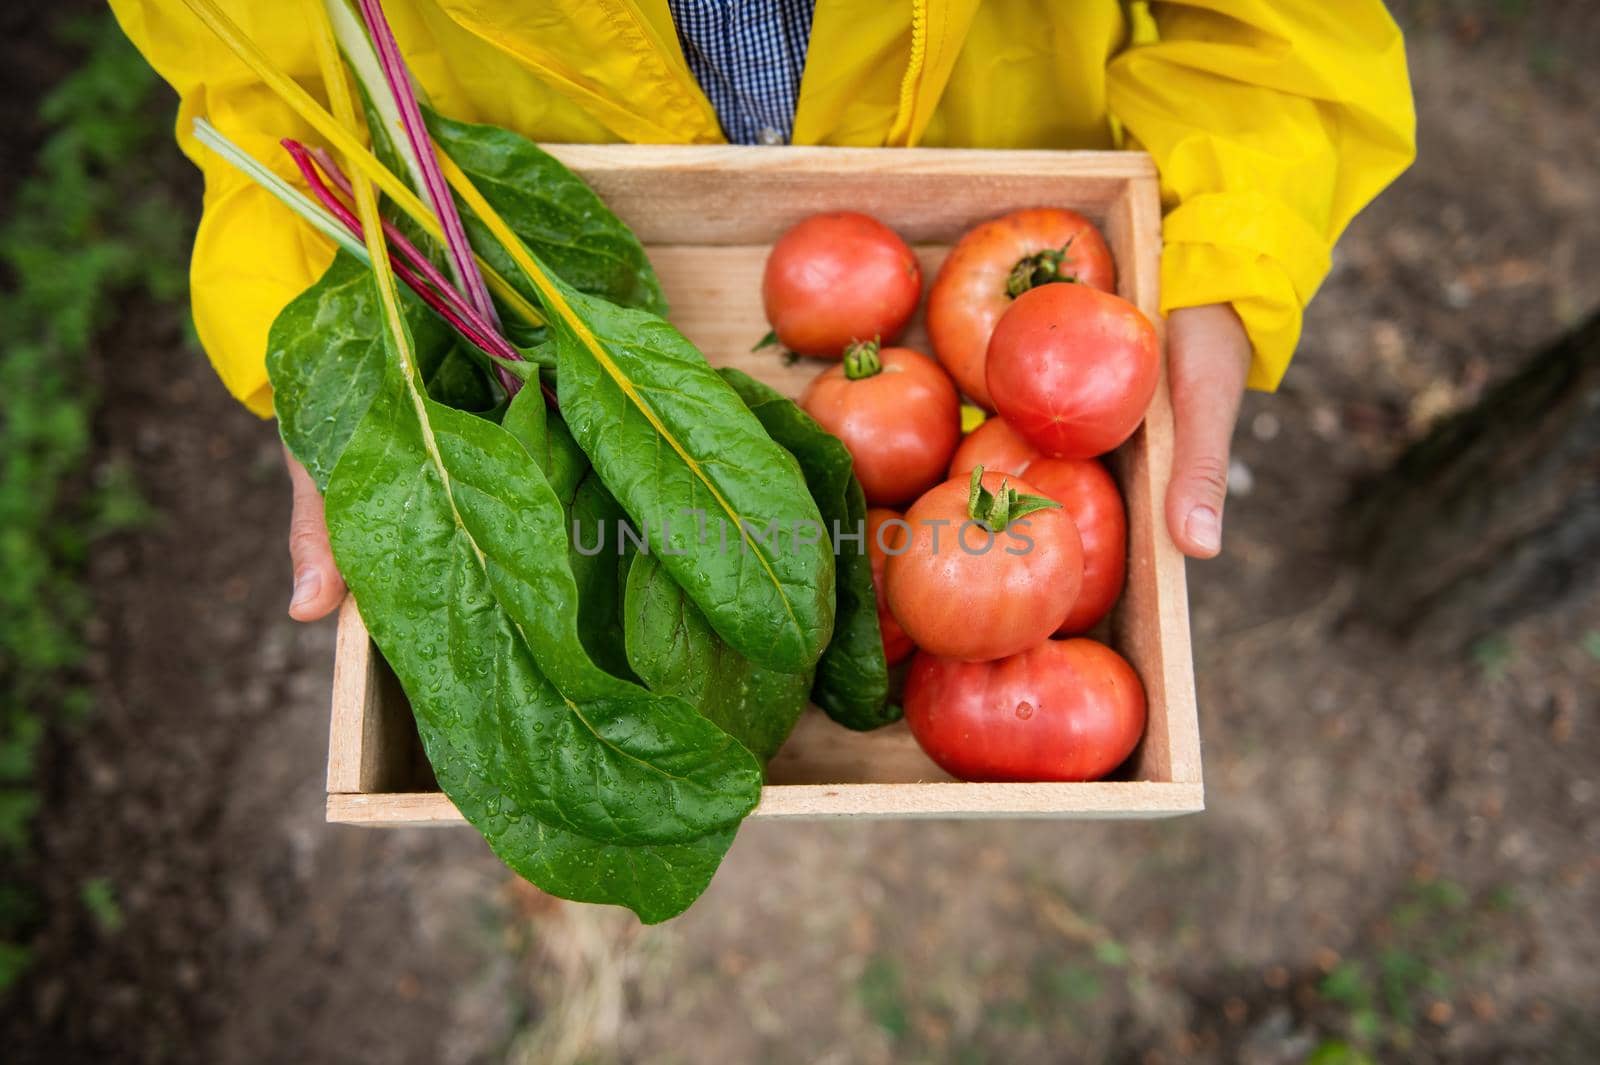 Top view of a wooden crate full of harvested organic swiss chard, ripe juicy tomatoes in the hands of a farmer agronomist wearing yellow work raincoat. Vegetables for sale at local farmers market.